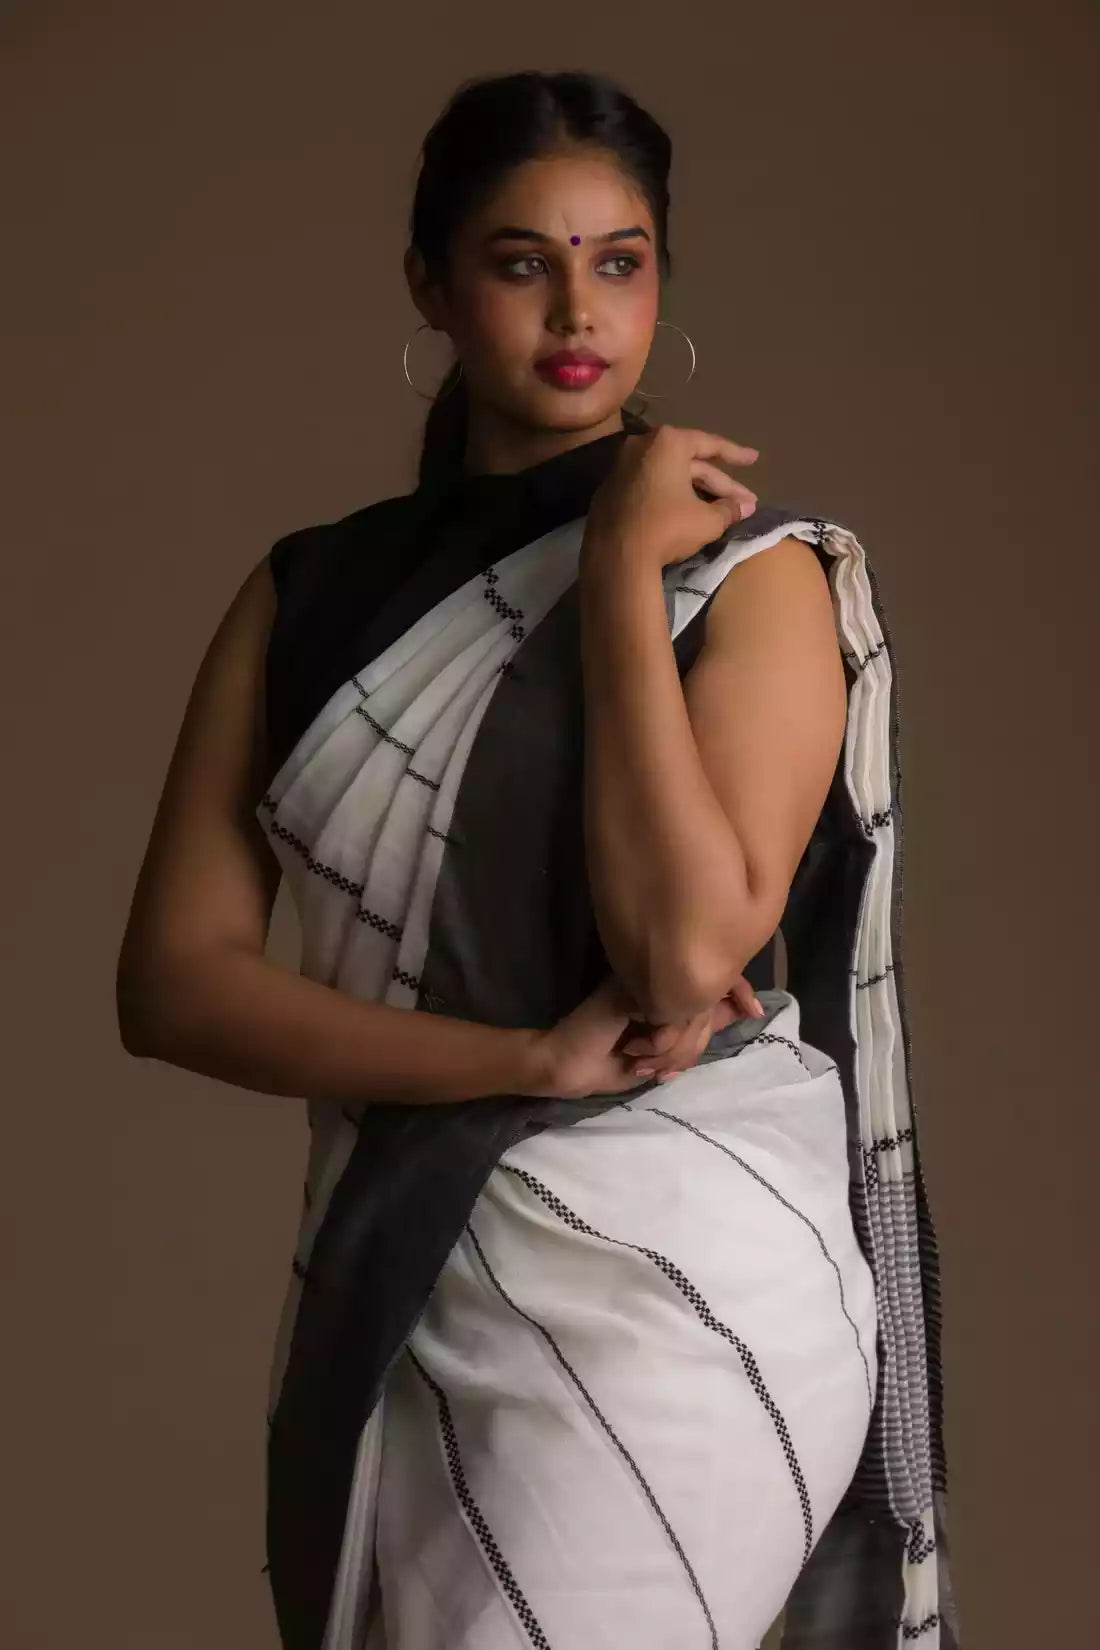 an attractive woman wearing white saree with black stripes on it